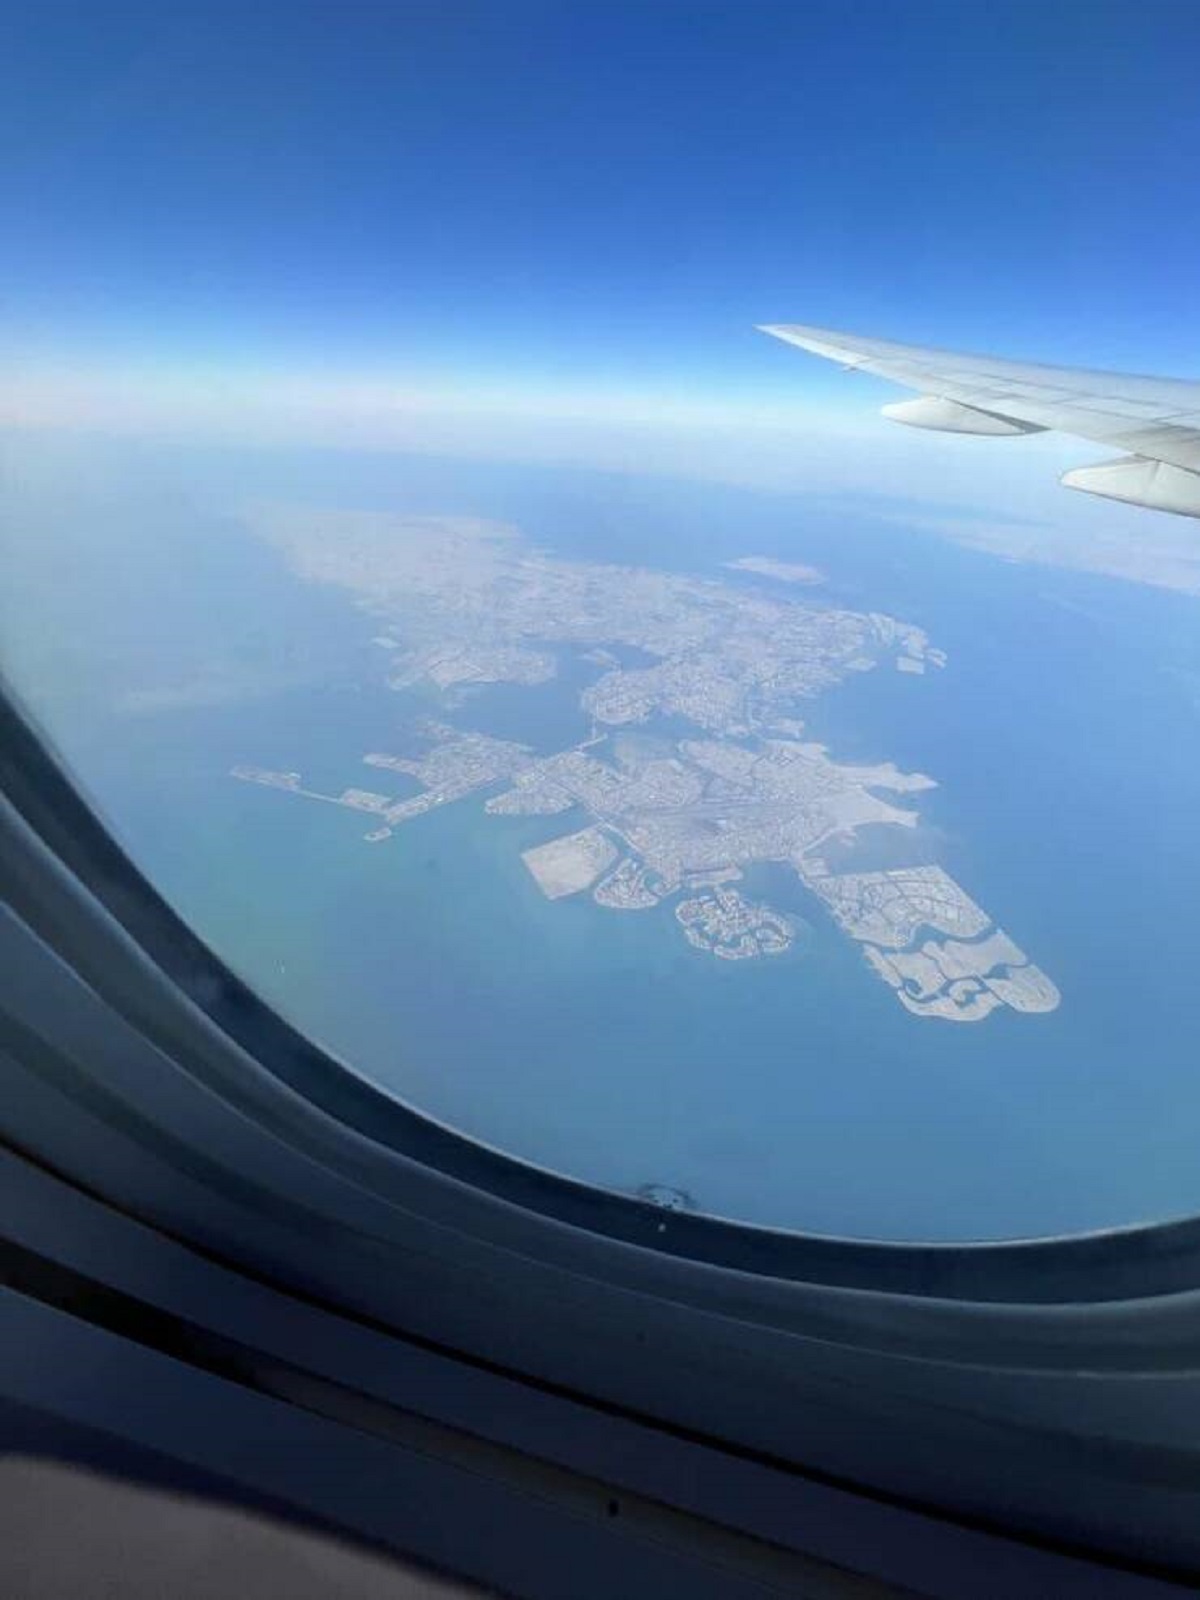 If you're flying in a plane above Bahrain, you can see the entire country: